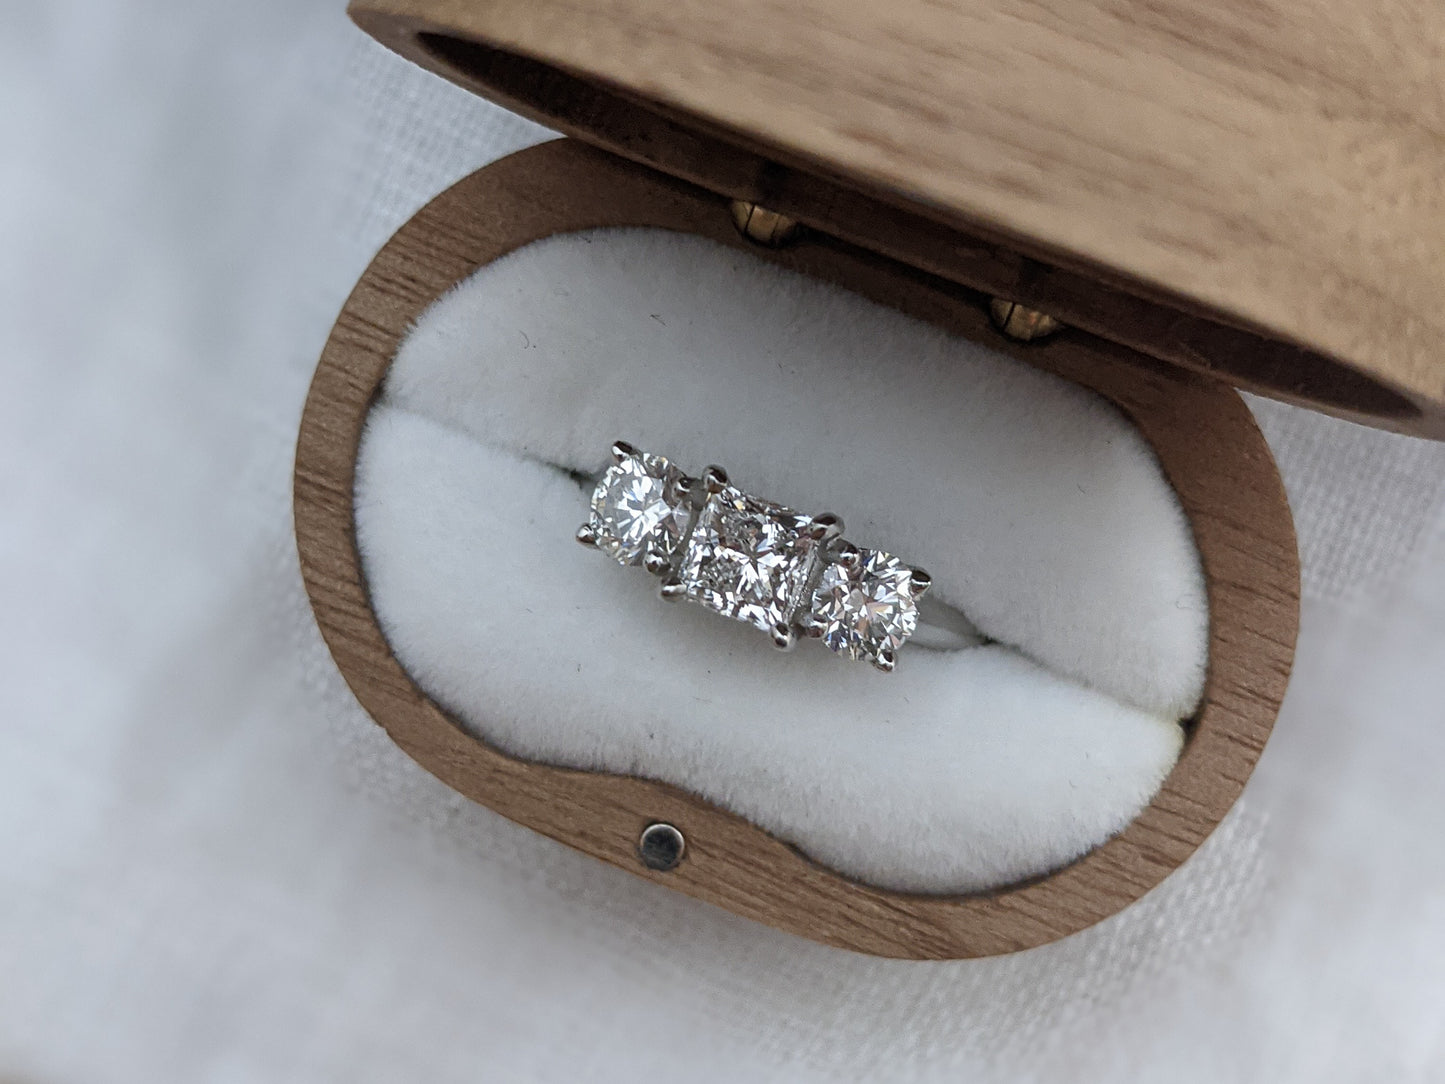 The Princess Trilogy Engagement ring